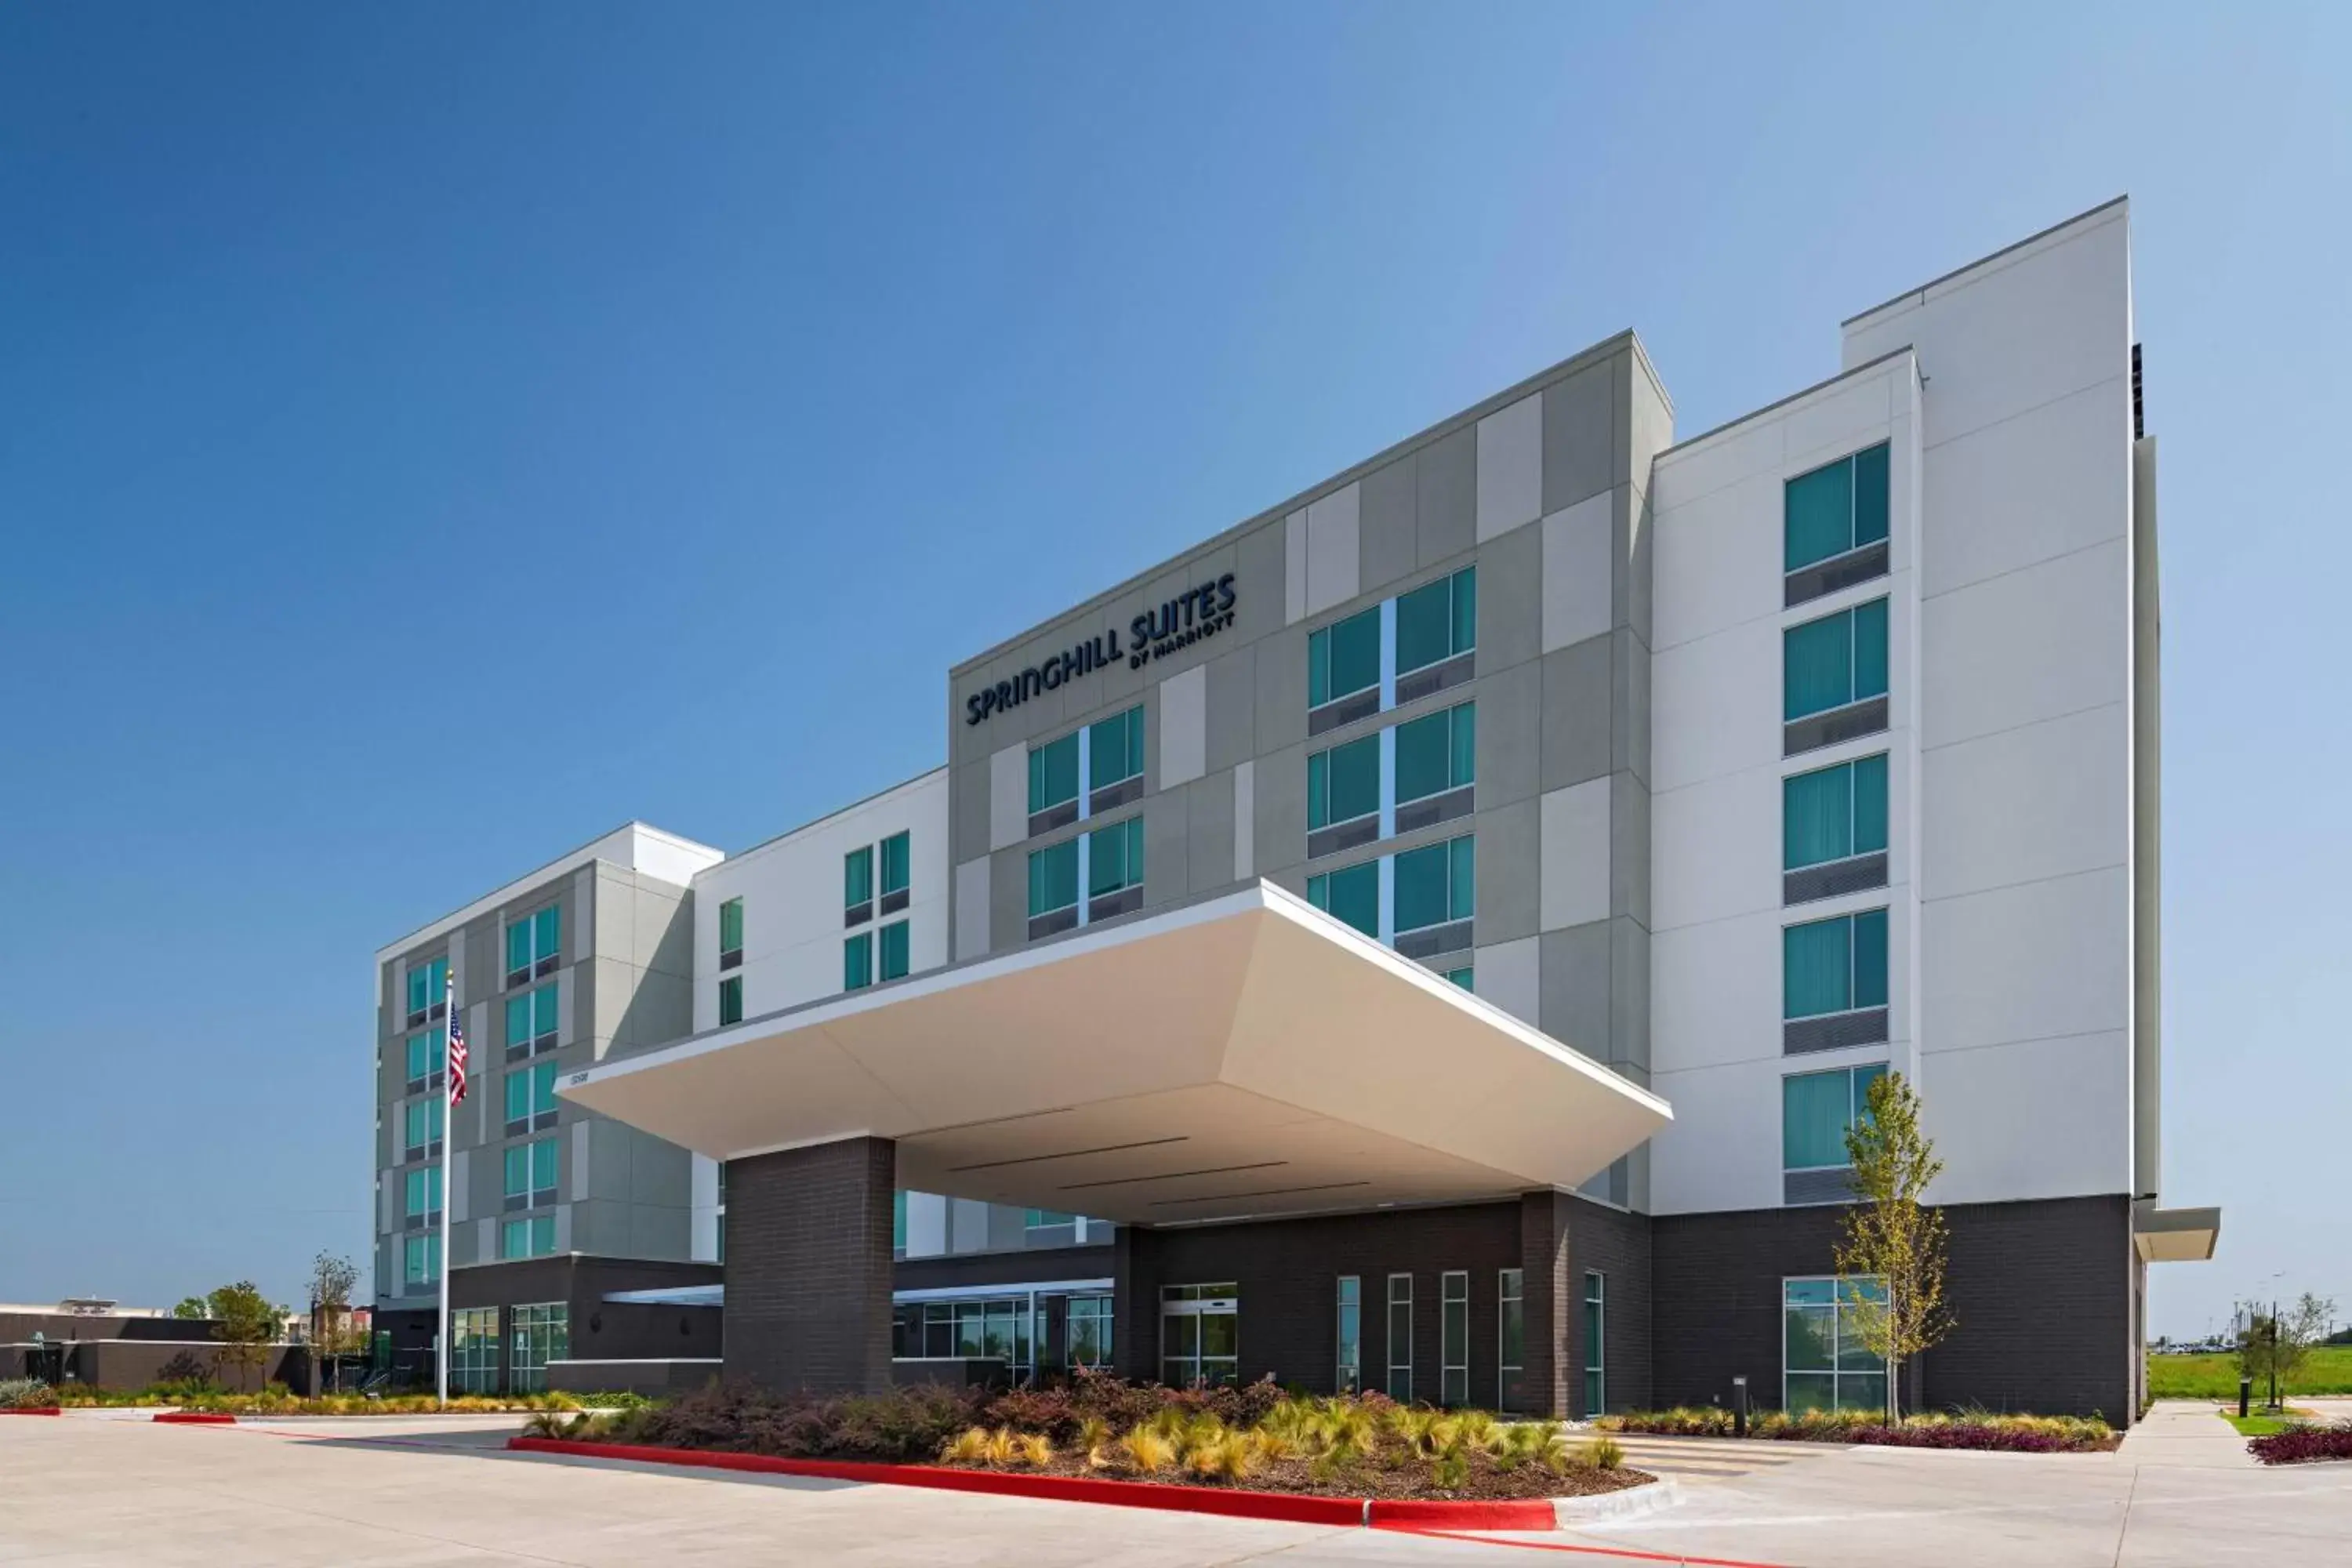 Property Building in SpringHill Suites by Marriott Dallas Richardson/University Area